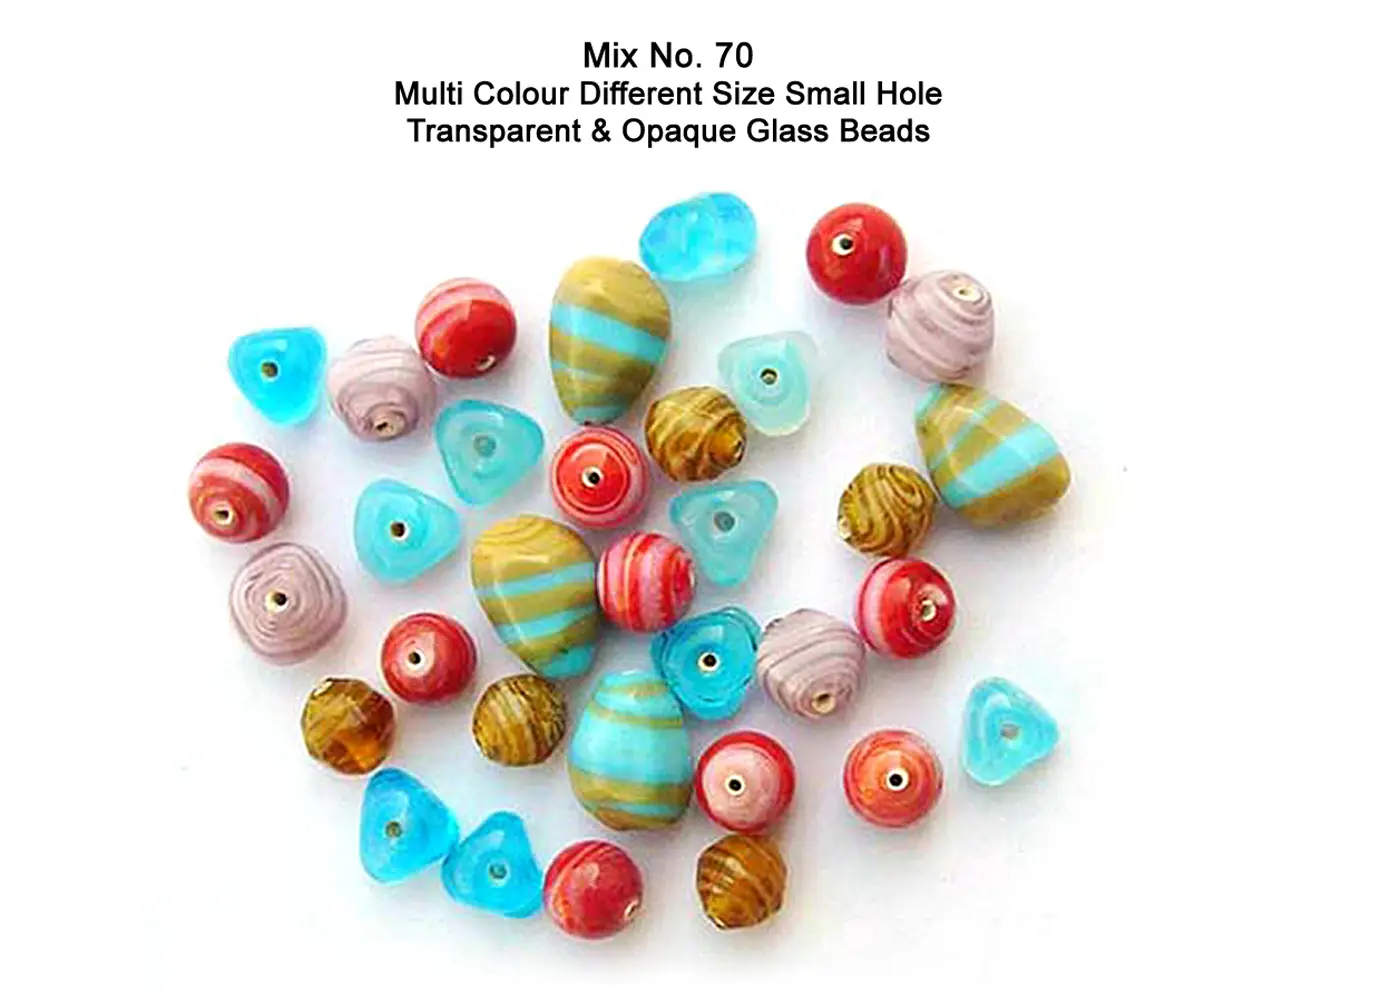 Multi color different size small hole transparent and opaque glass beads